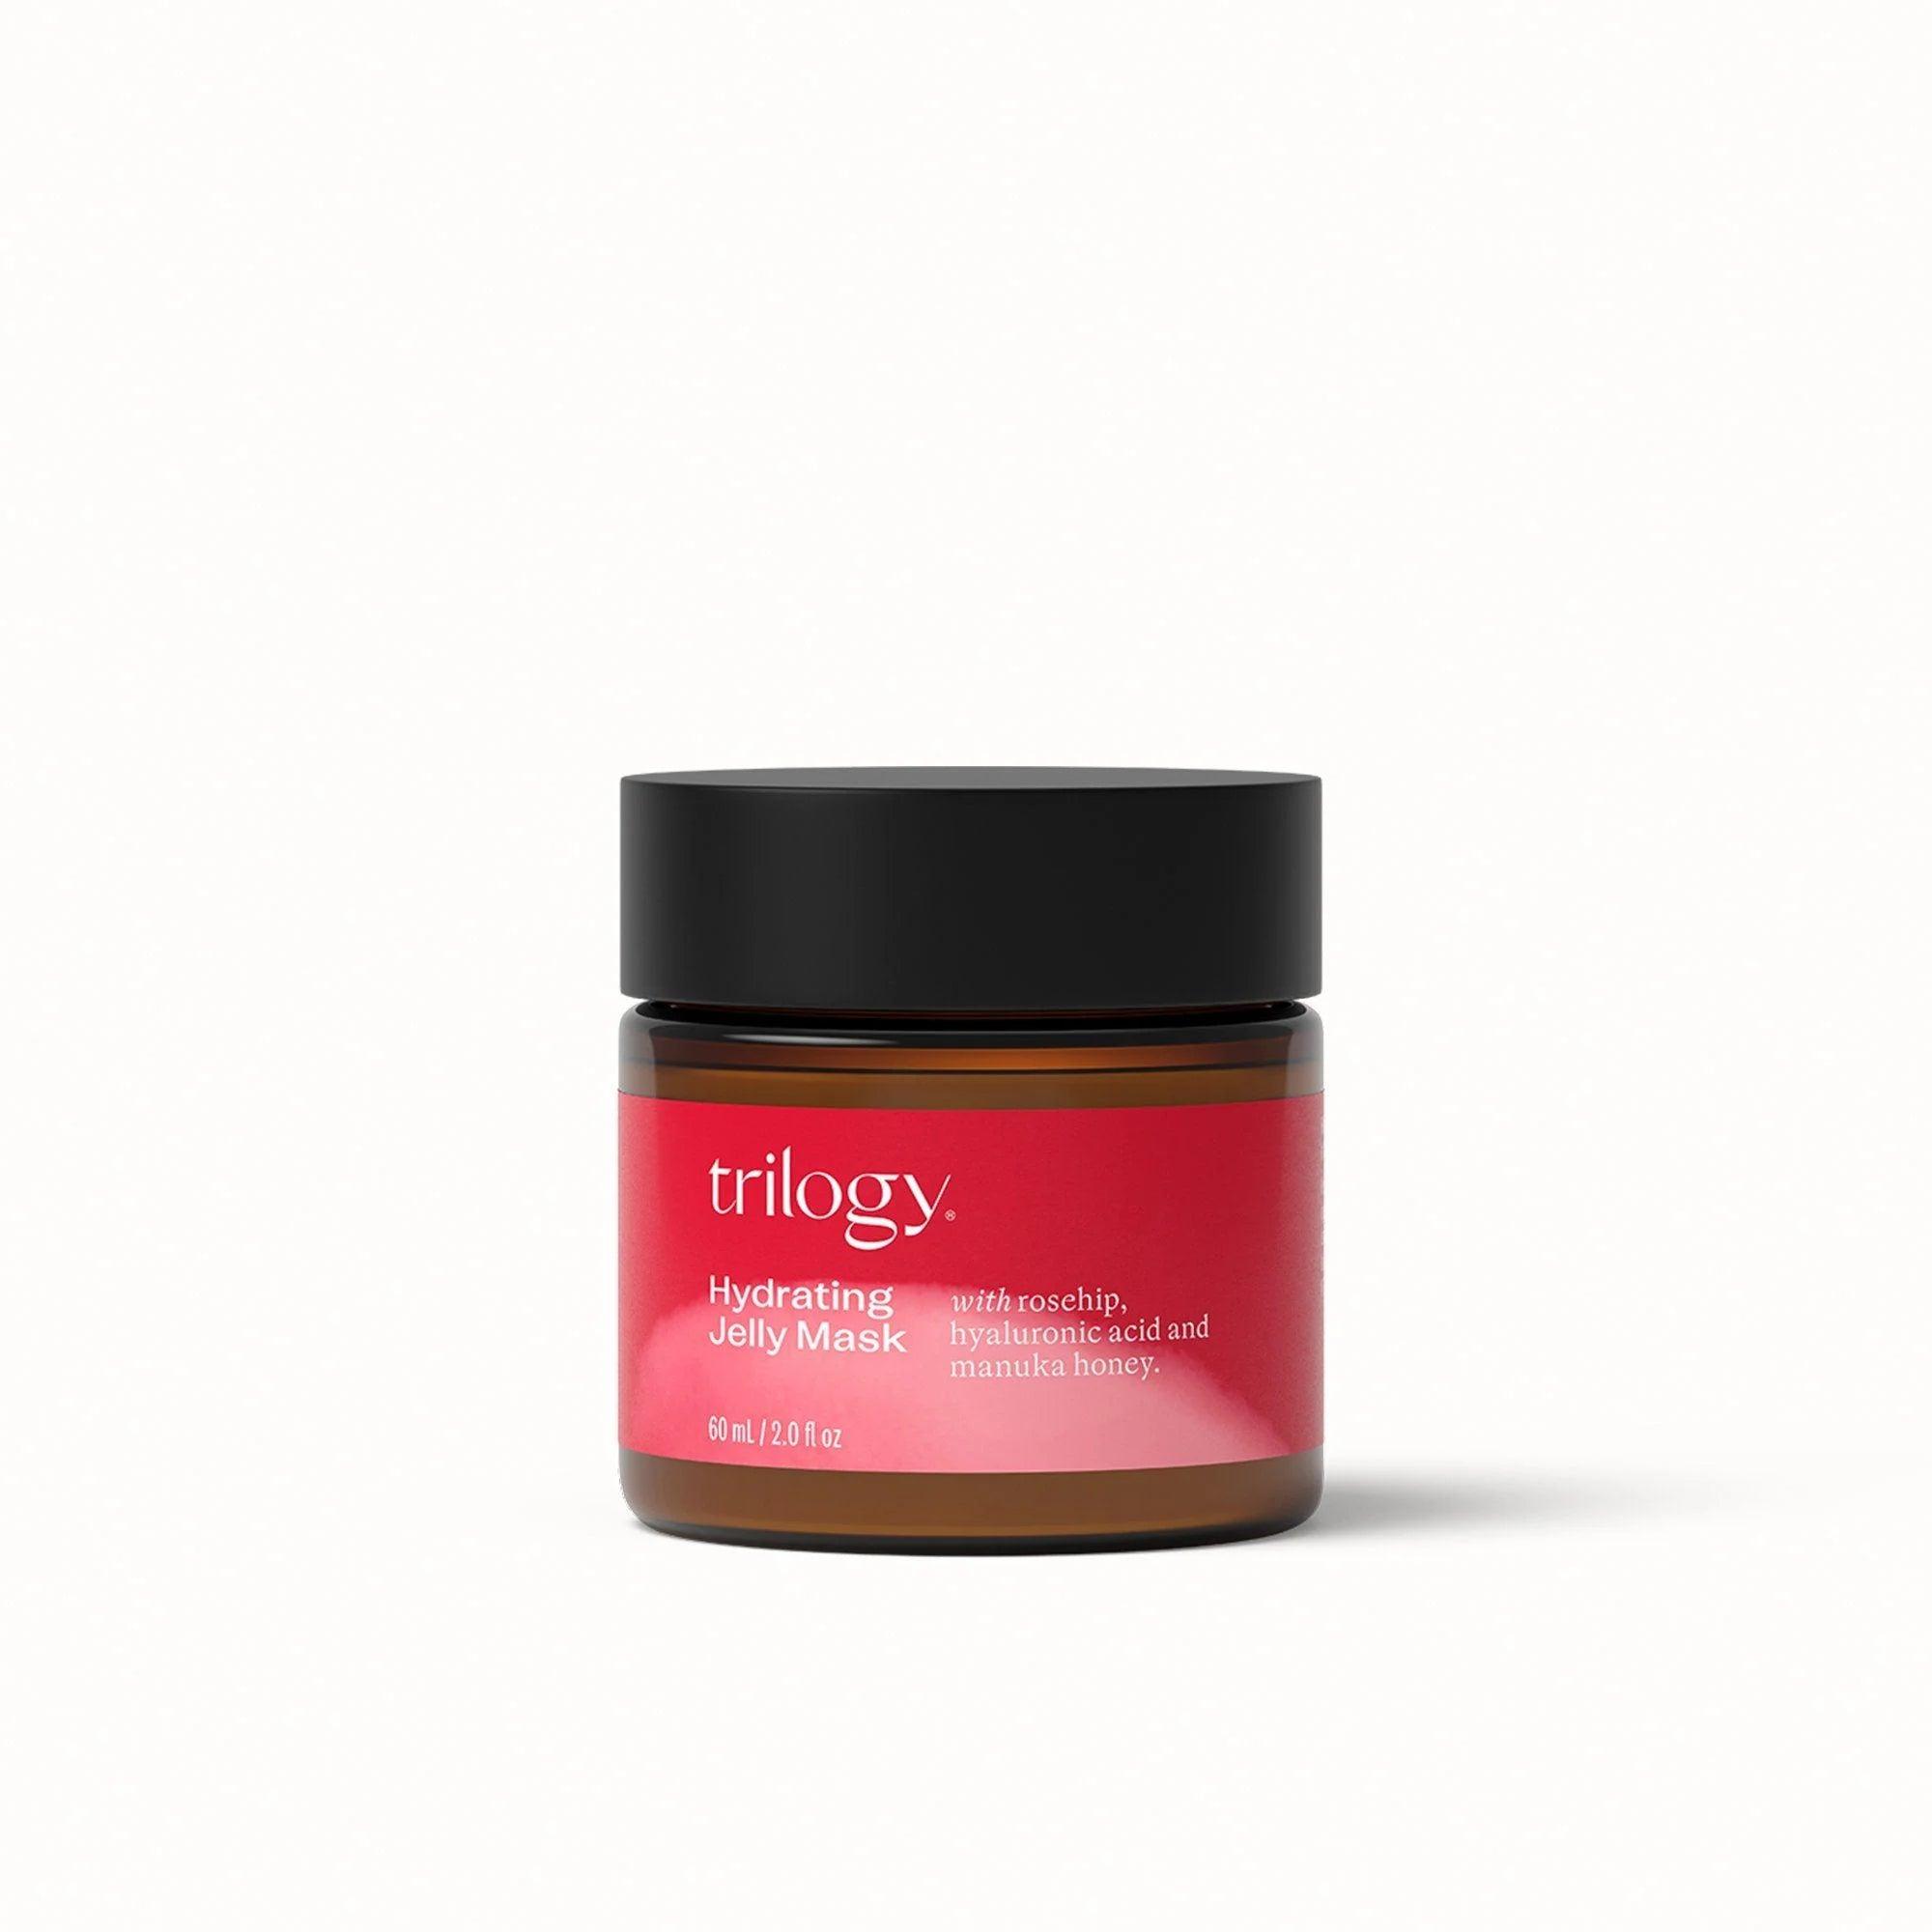 Trilogy Hydrating Jelly Mask 60ml by Love Nature